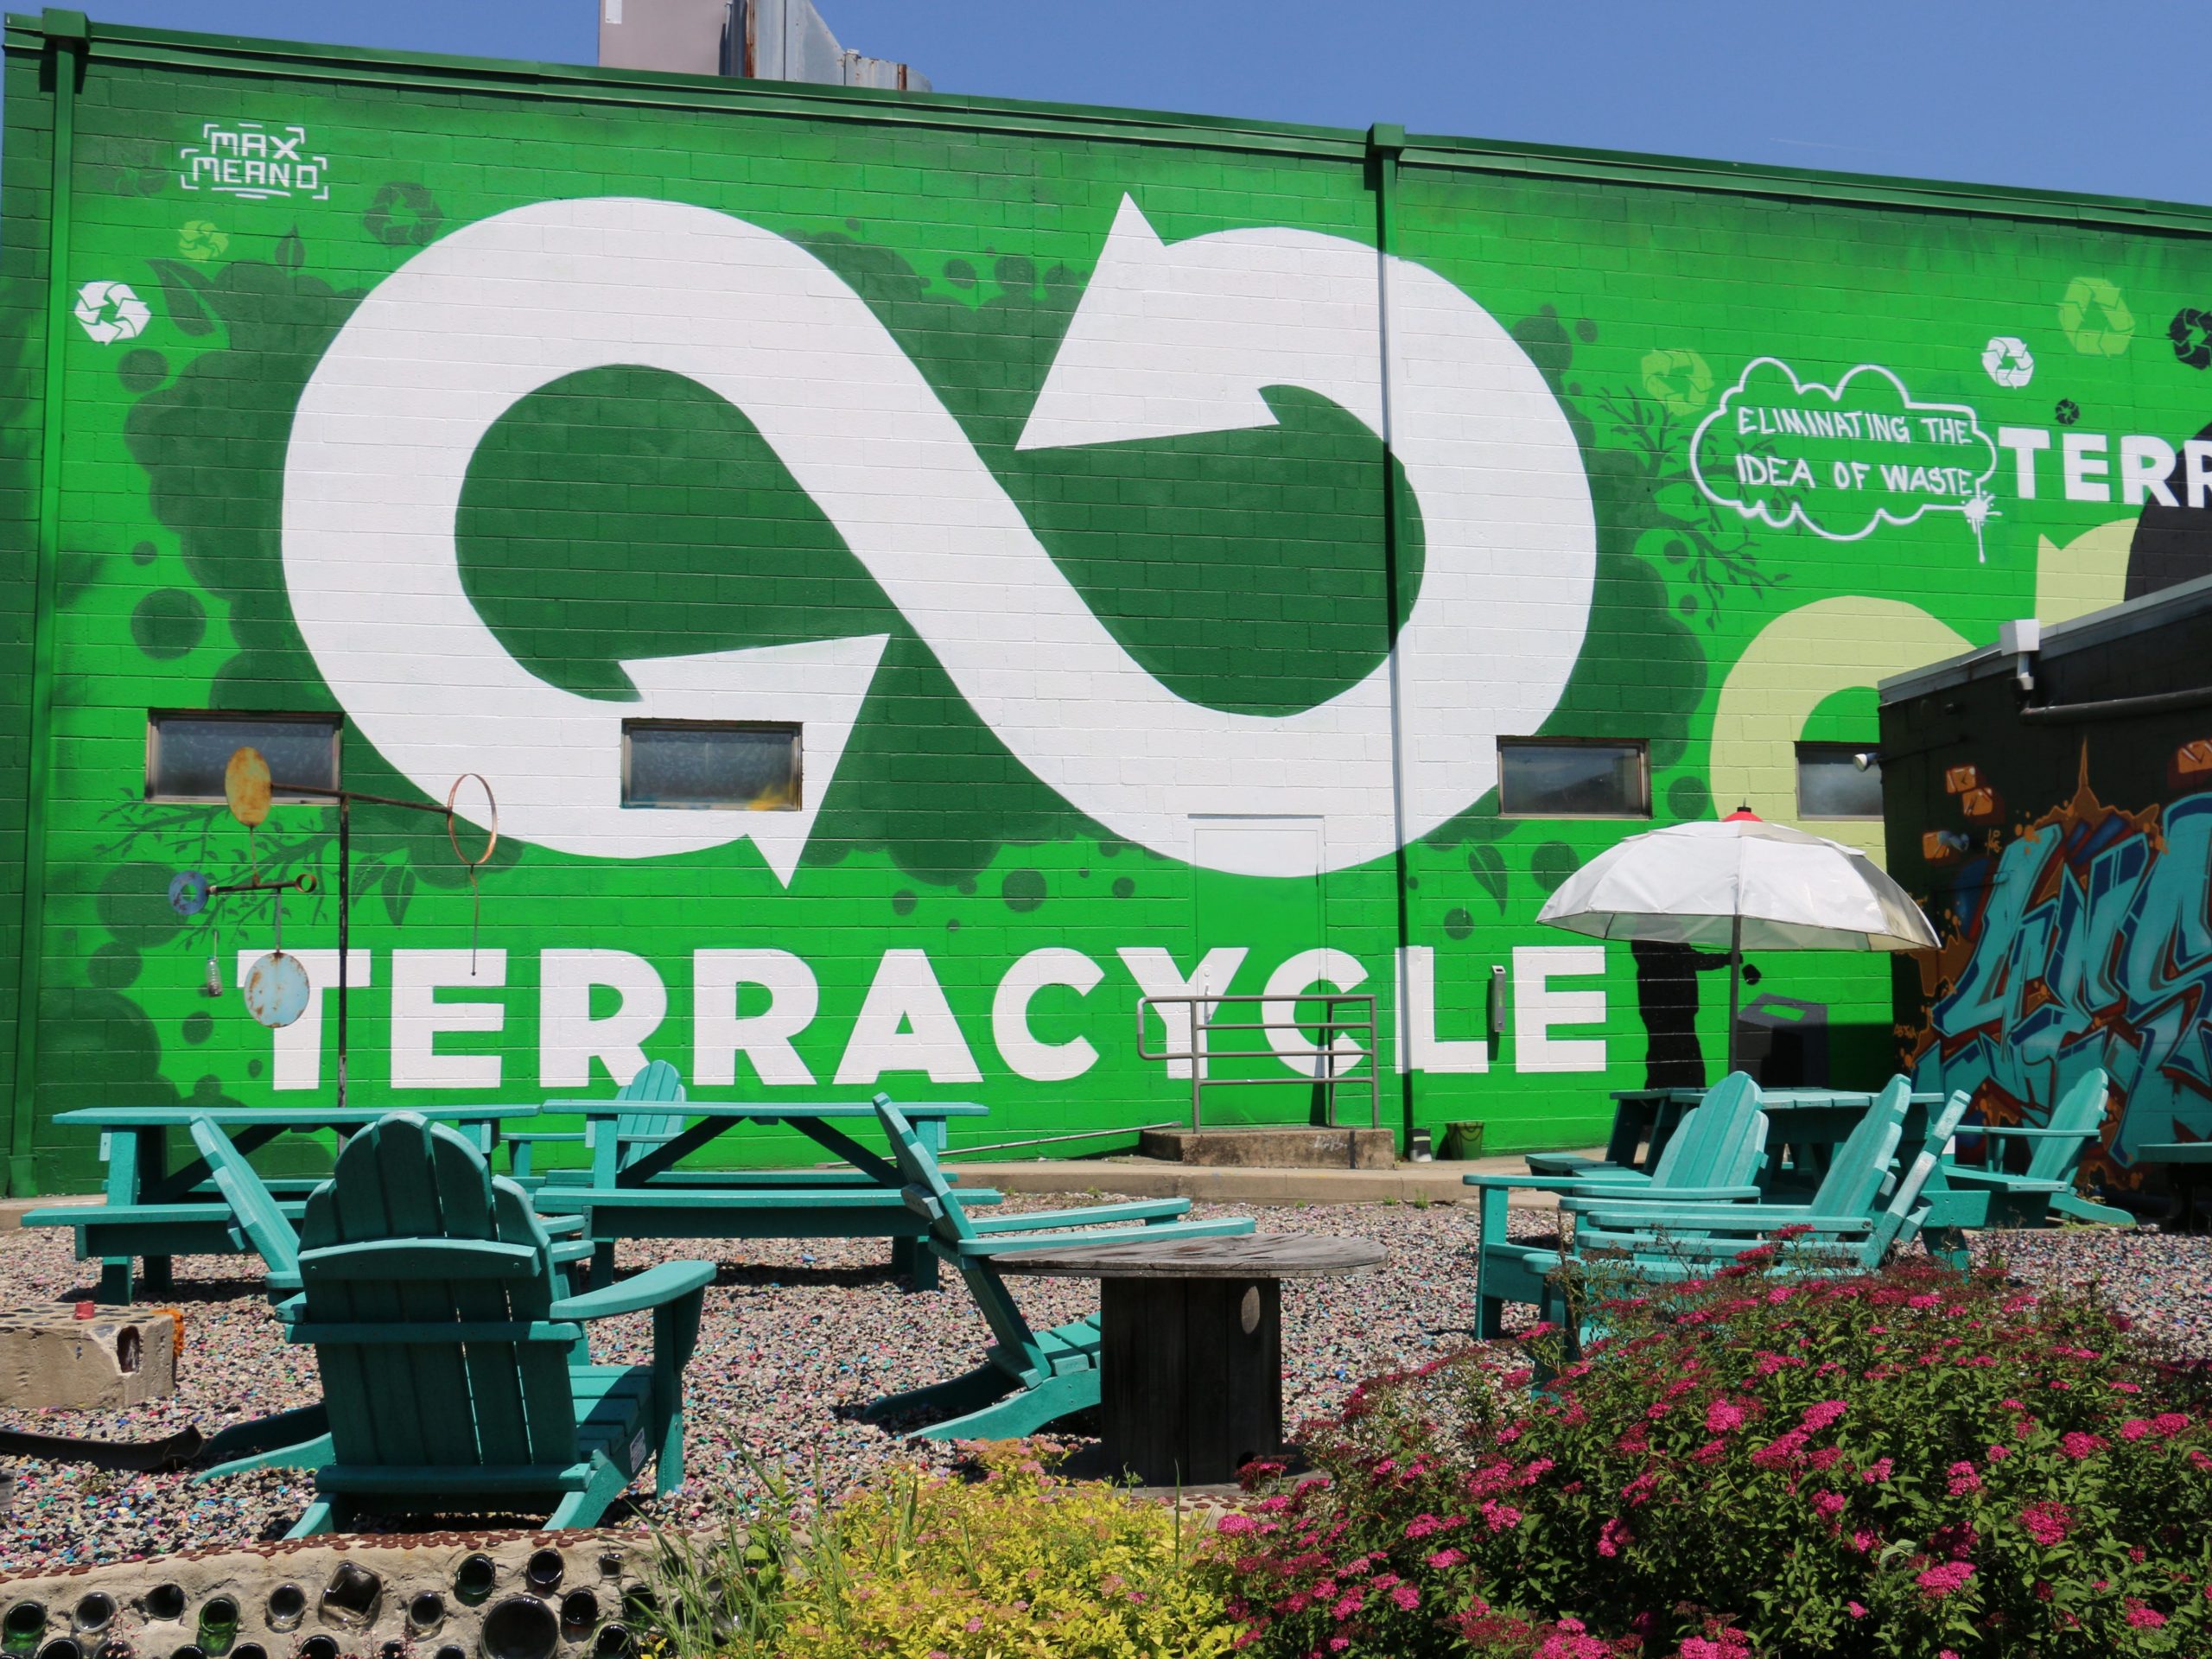 the TerraCycle building with a green wall and logo